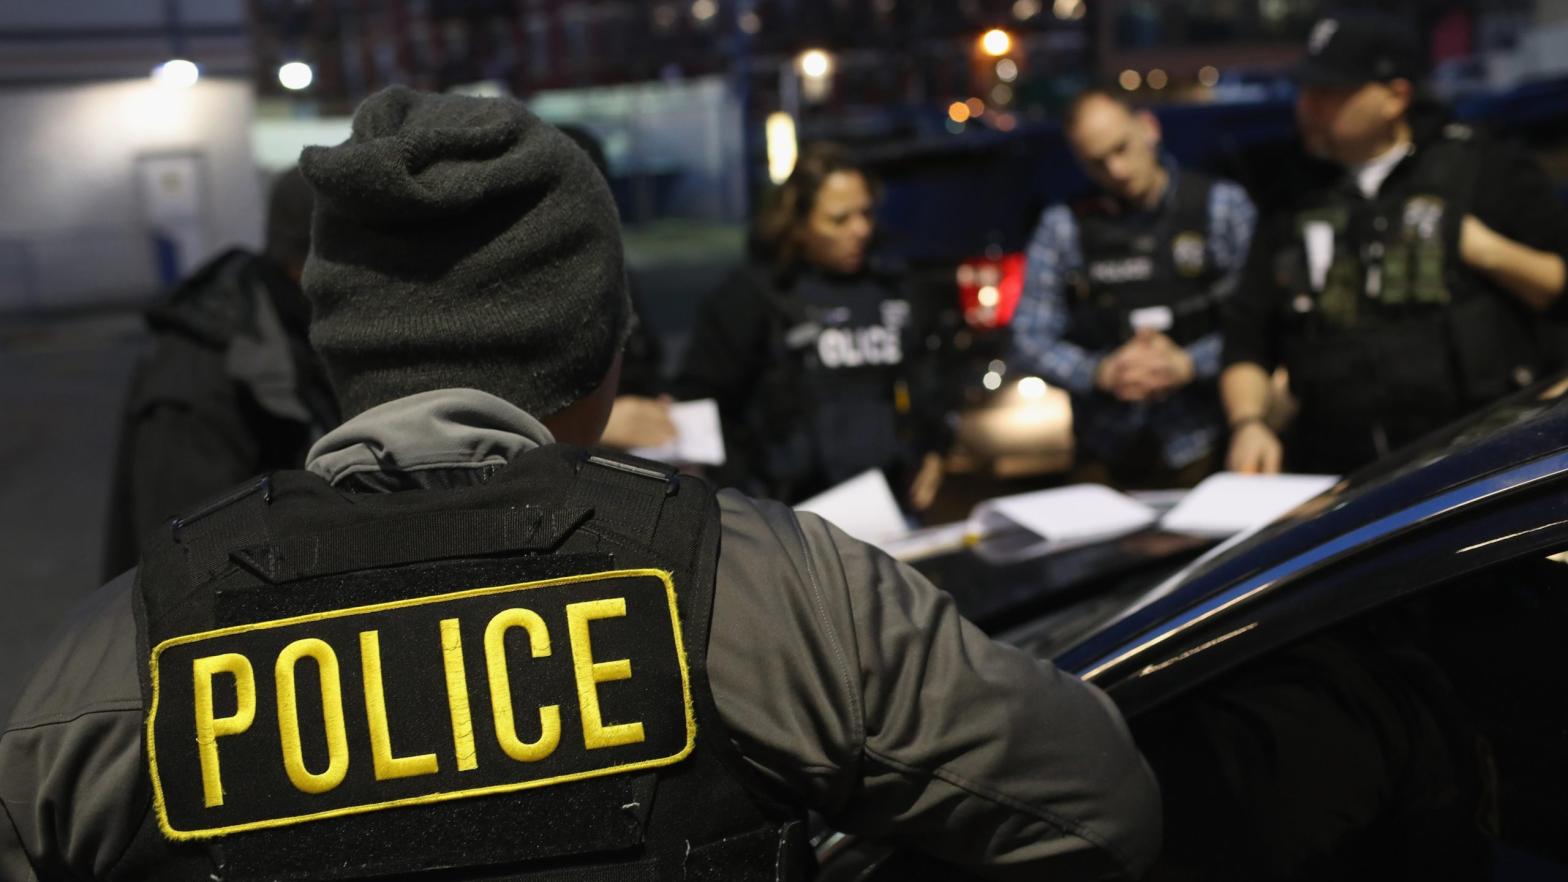 U.S. Immigration and Customs Enforcement (ICE) officers prepare for immigration raids in April 2018 in New York City. (Photo: John Moore, Getty Images)